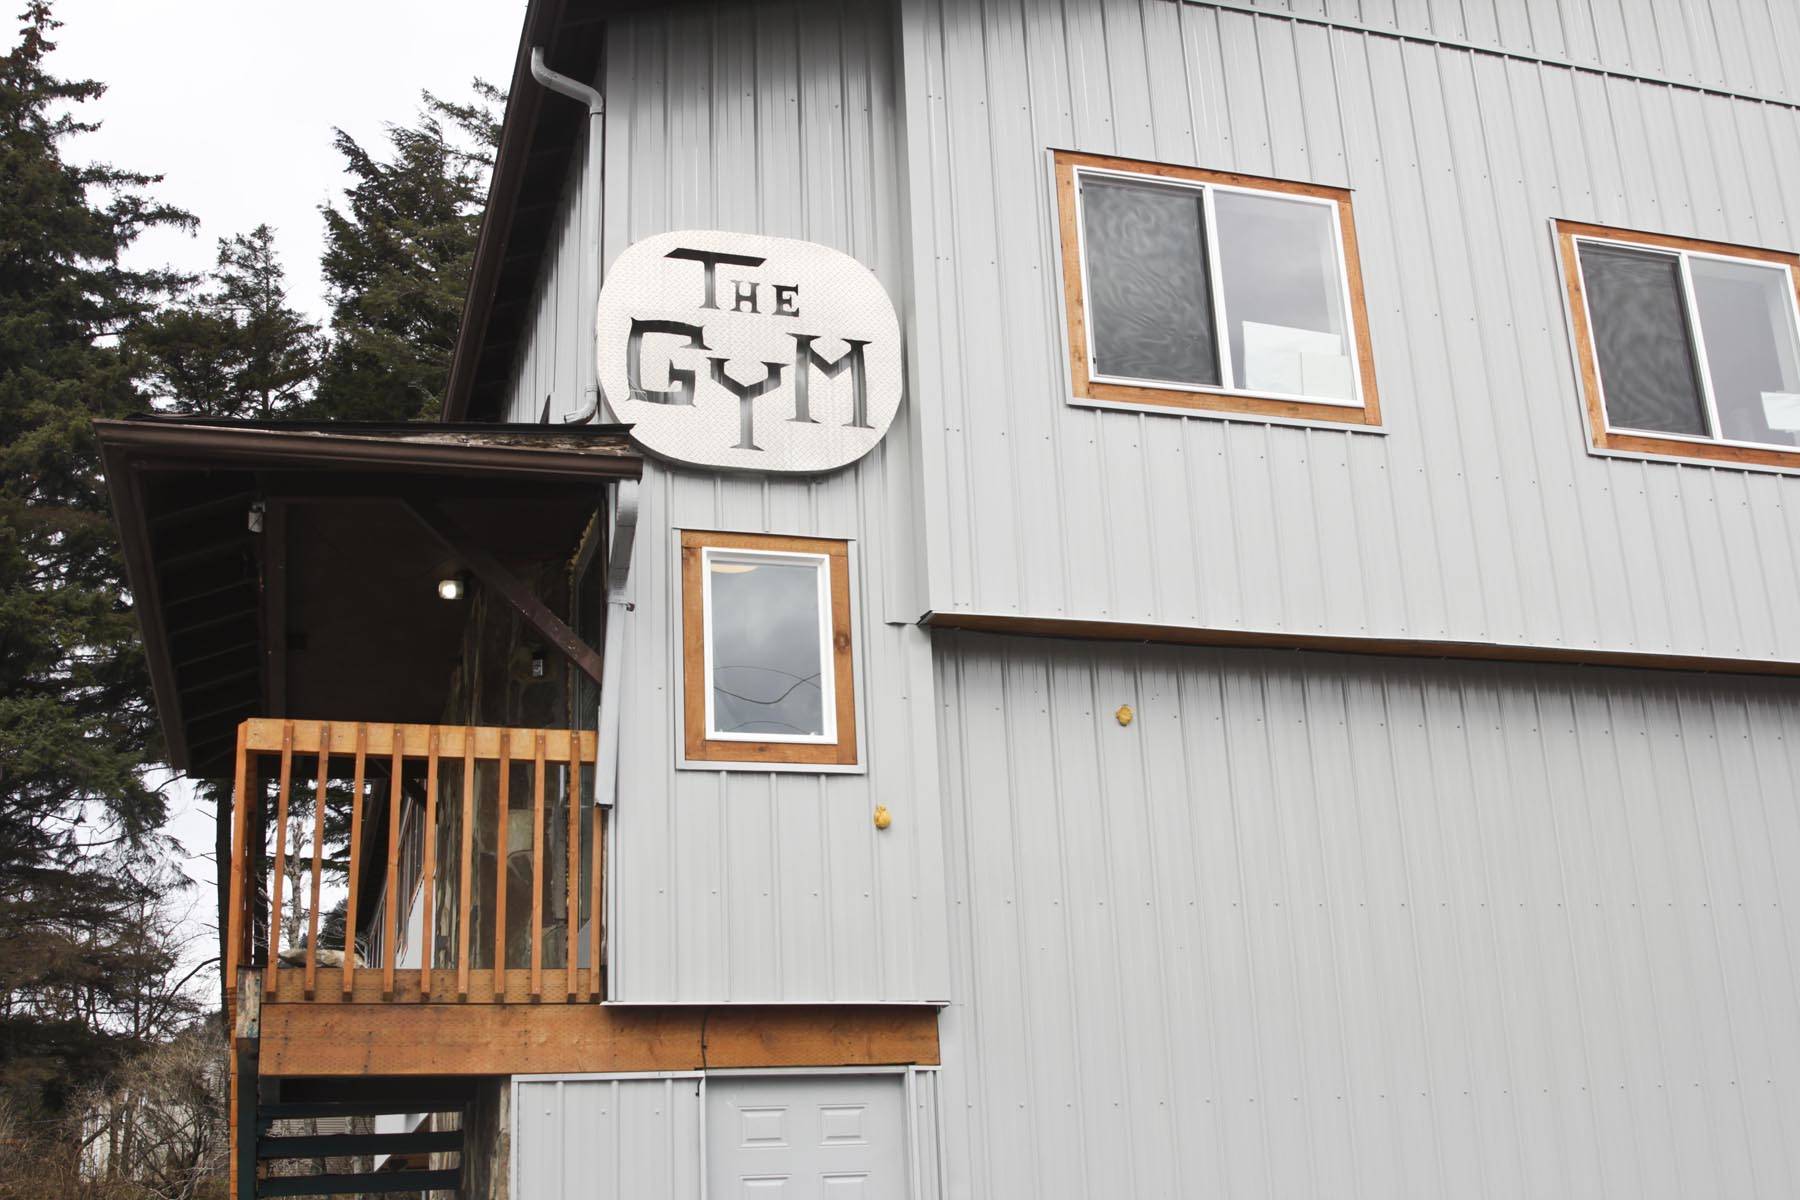 The Gym in Juneau is closed along with many other public spaces to prevent the spread of the coronavirus, March 20, 2020. (Michael S. Lockett | Juneau Empire)